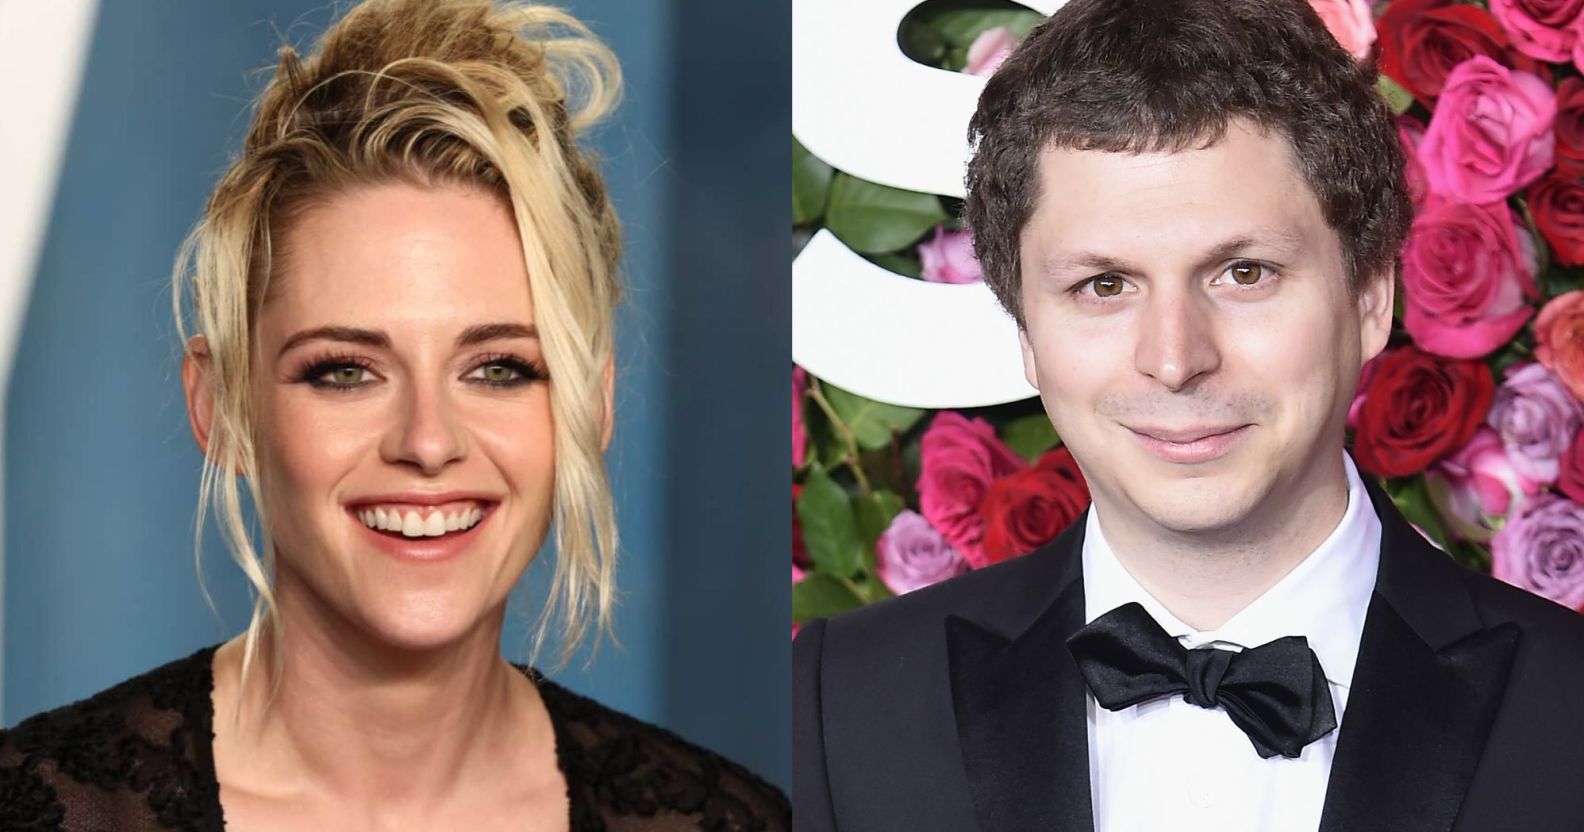 Kristen Stewart smiling wearing a black top at the Vanity Fair Oscars after party, while Michael Cera wears black suit at the 2018 Tony Awards.